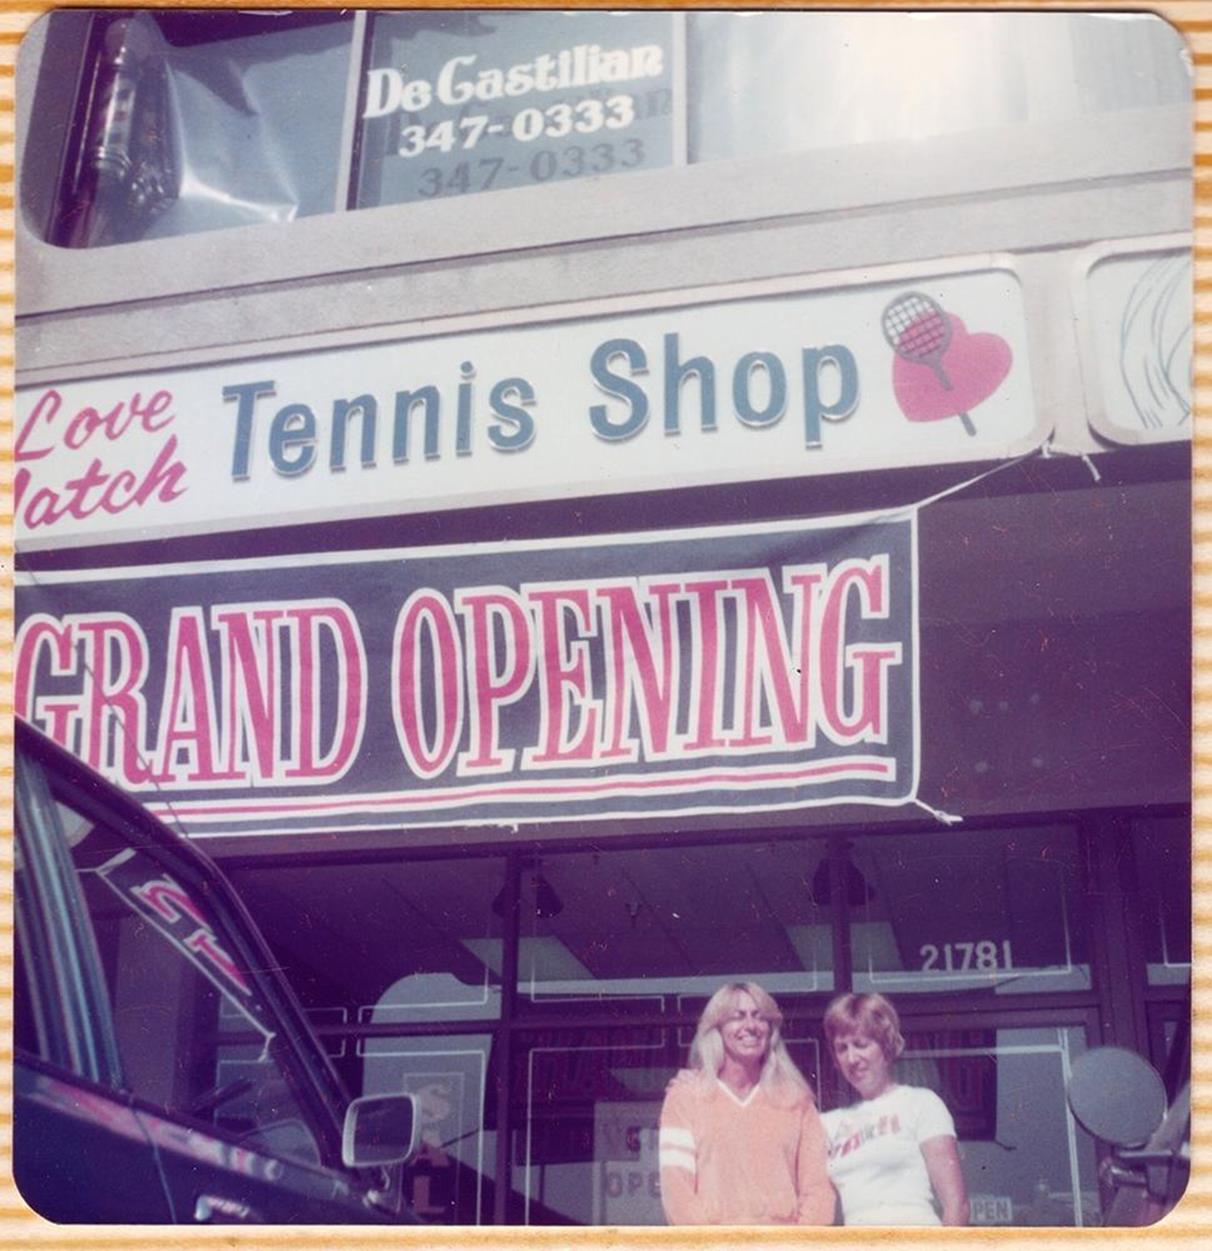 Photo of Lea Kramer (left) and Rona Levy (right) in front of Love Match Tennis Shop in 1974